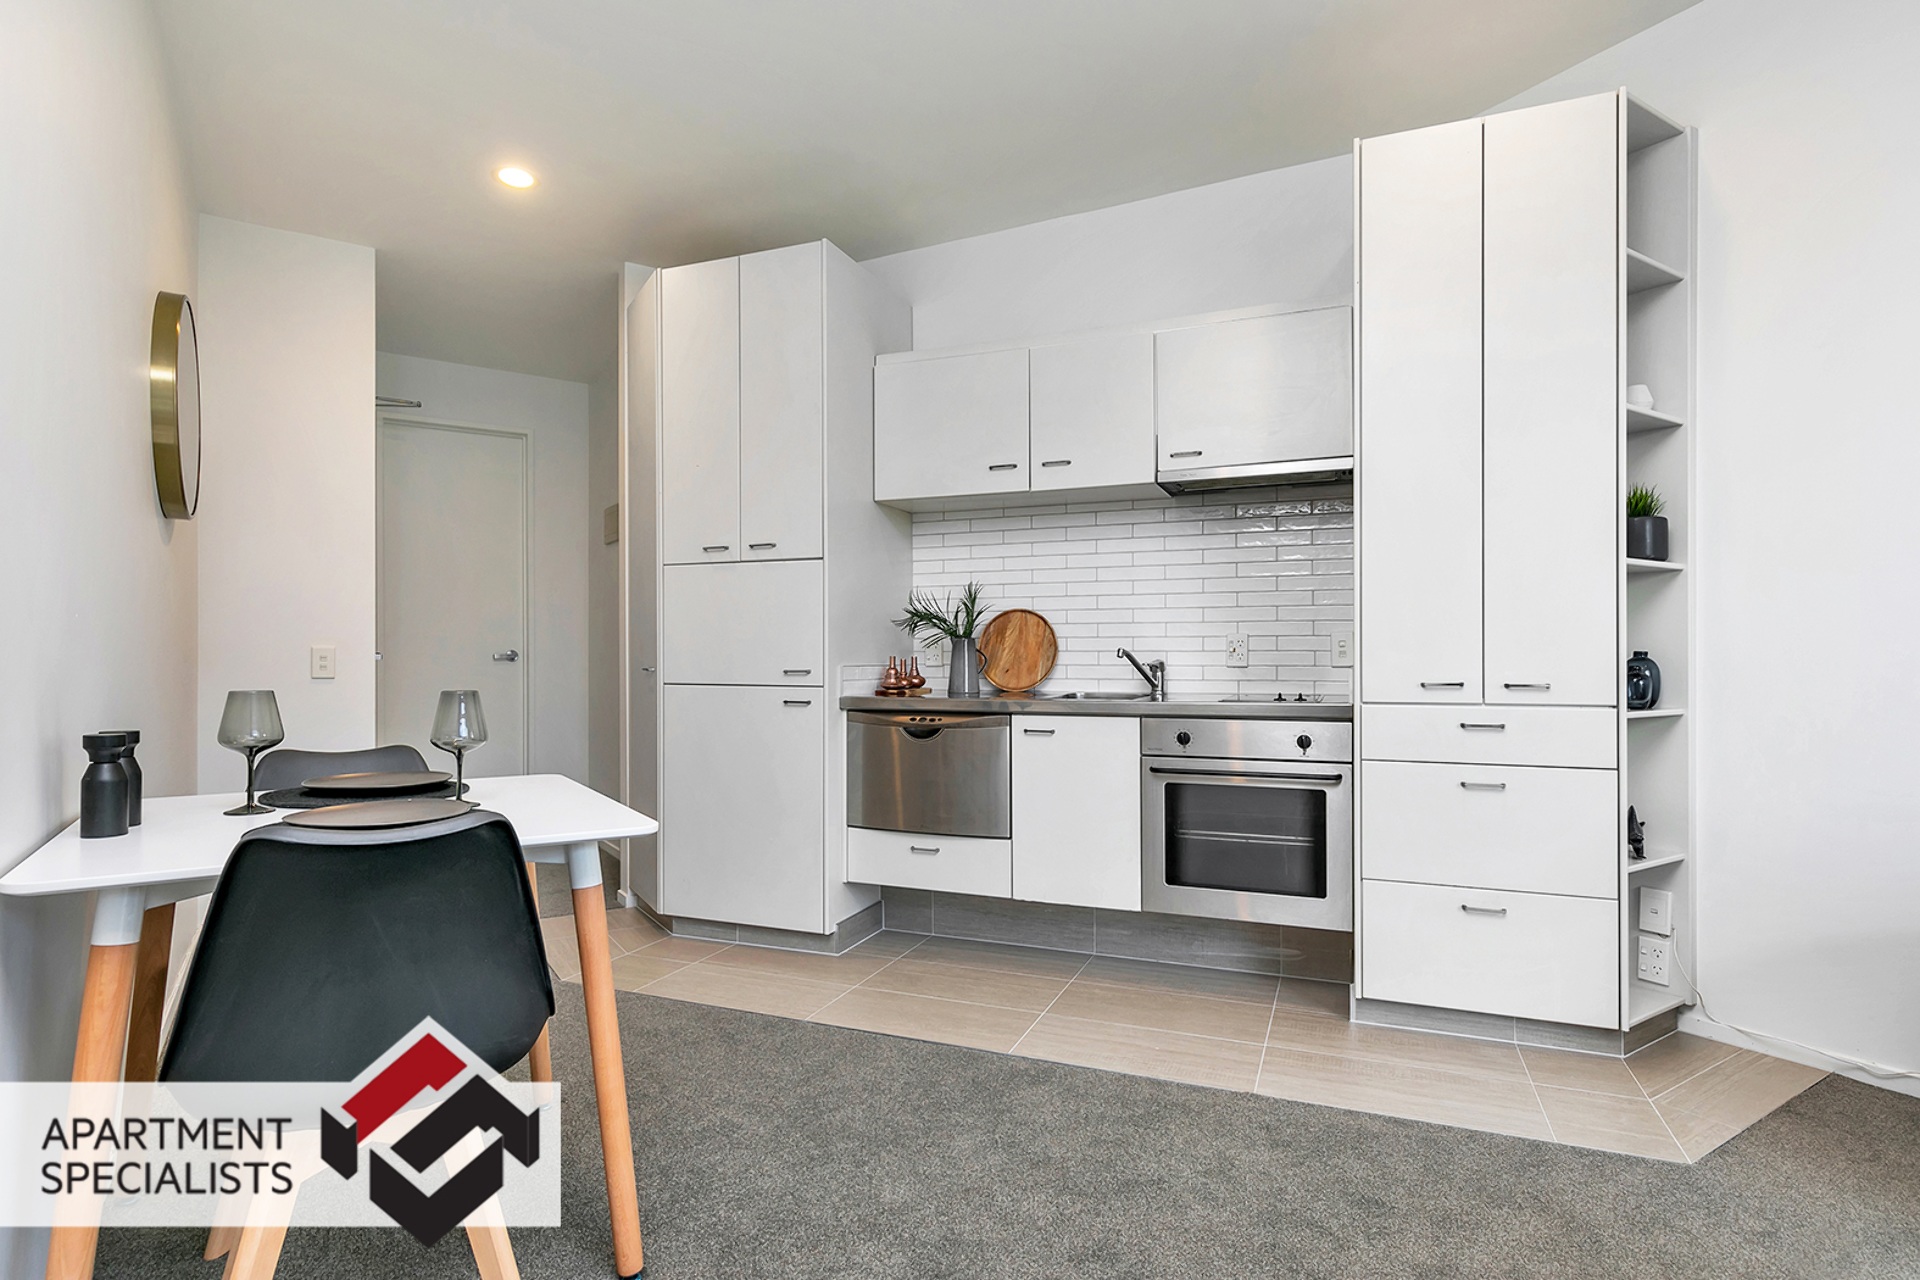 3 | 17 Blake Street, Ponsonby | Apartment Specialists